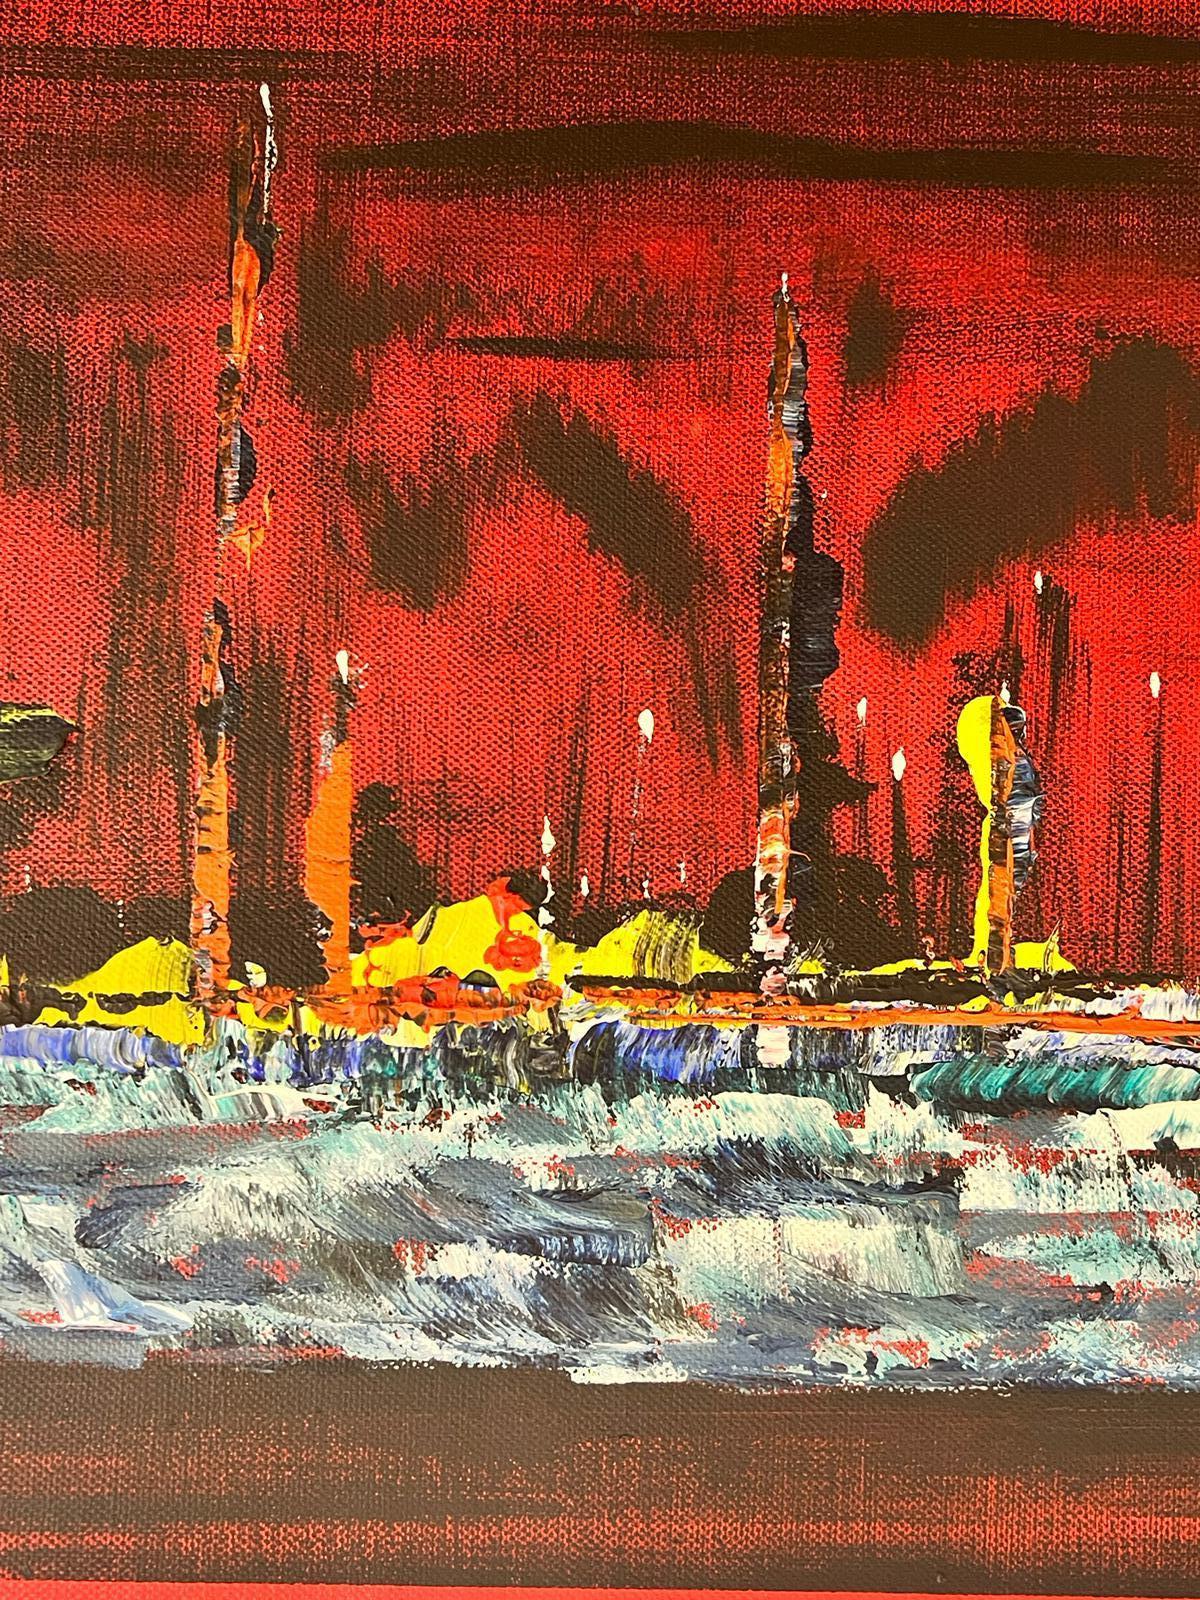 Huge British Contemporary Abstract Painting Crimson Cities Skyline Signed 2008 For Sale 3